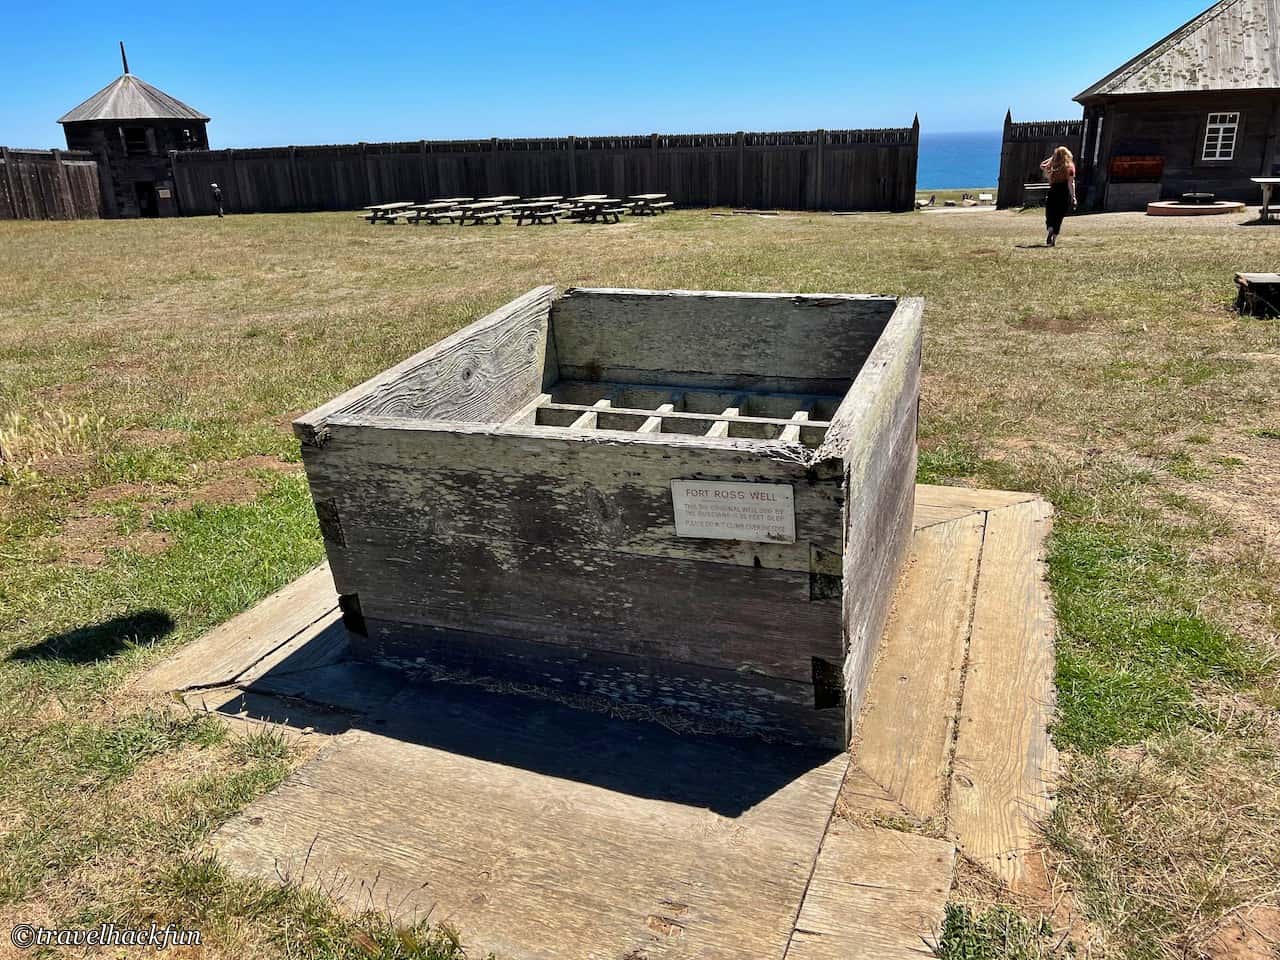 Fort Ross,俄羅斯堡,fort ross state park,fort ross state historic park,fort ross california 7